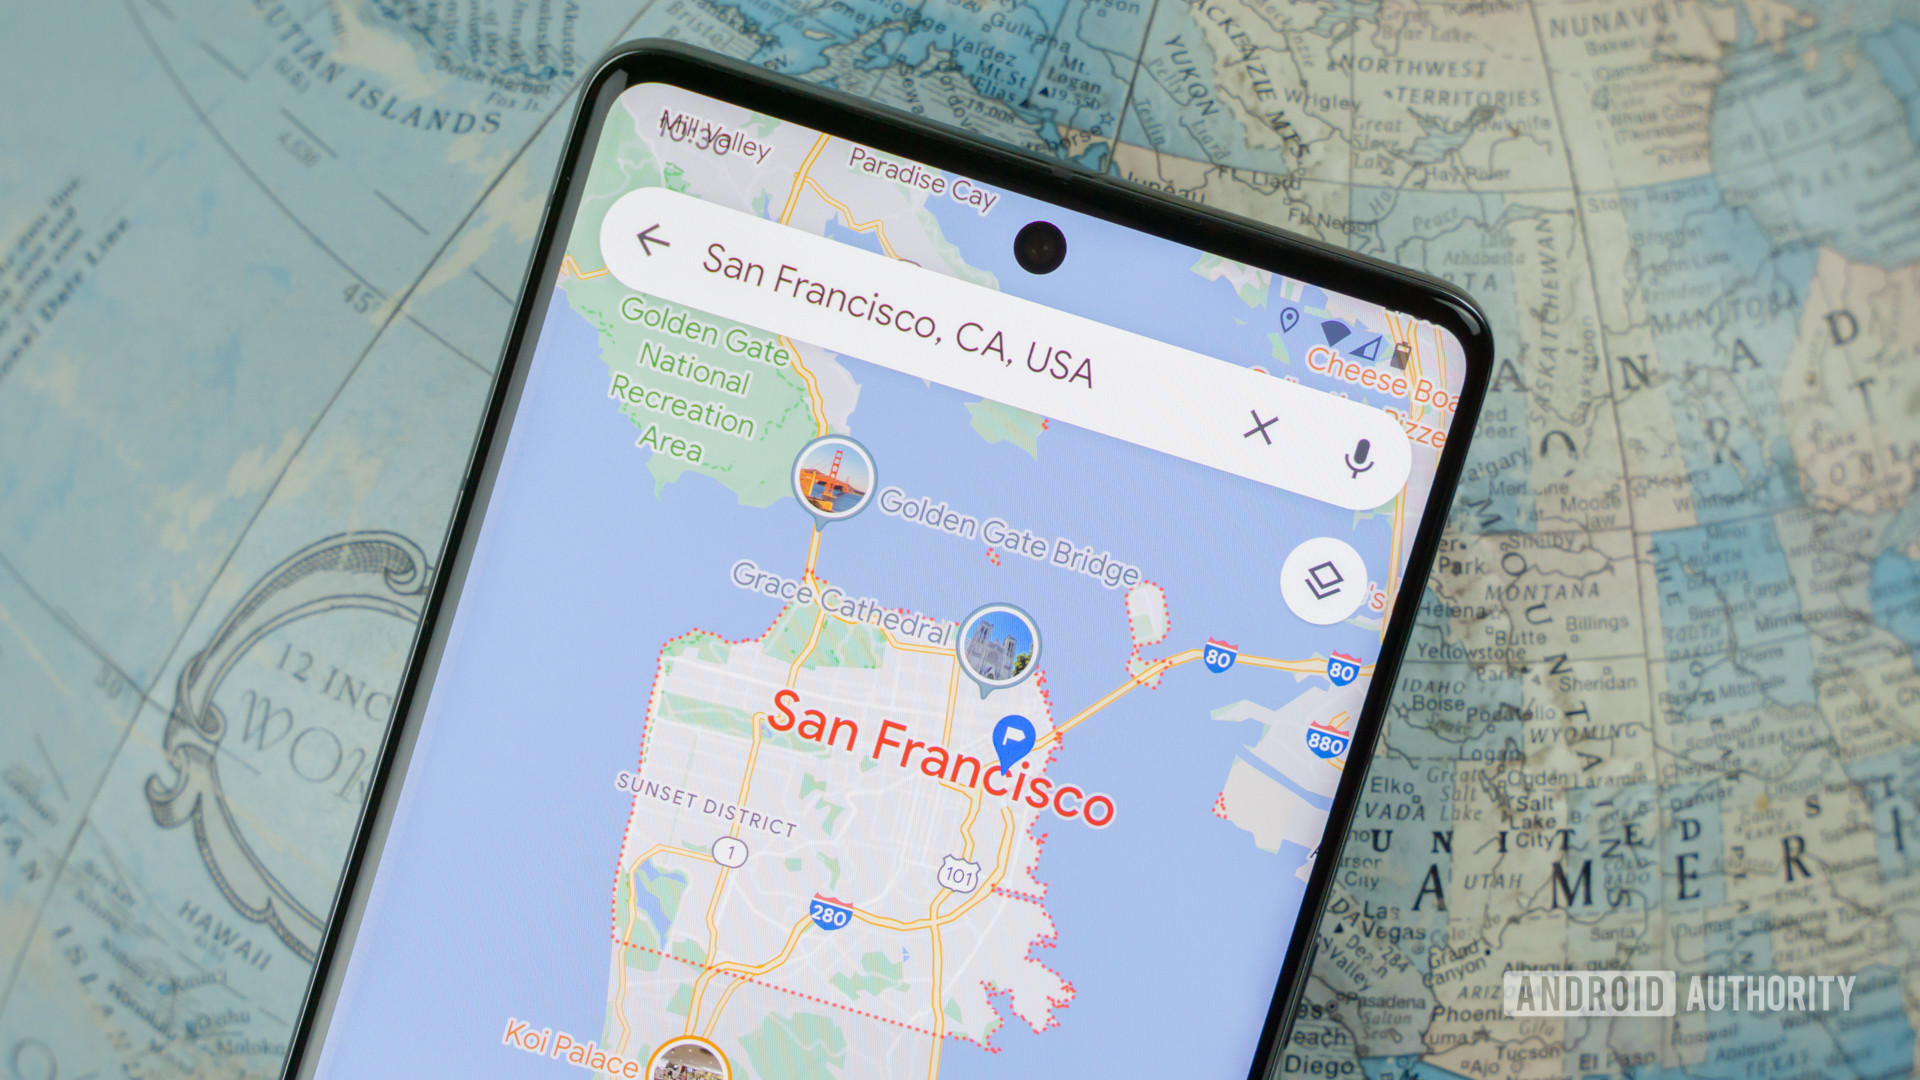 Google Maps tests adding entrance locations to buildings